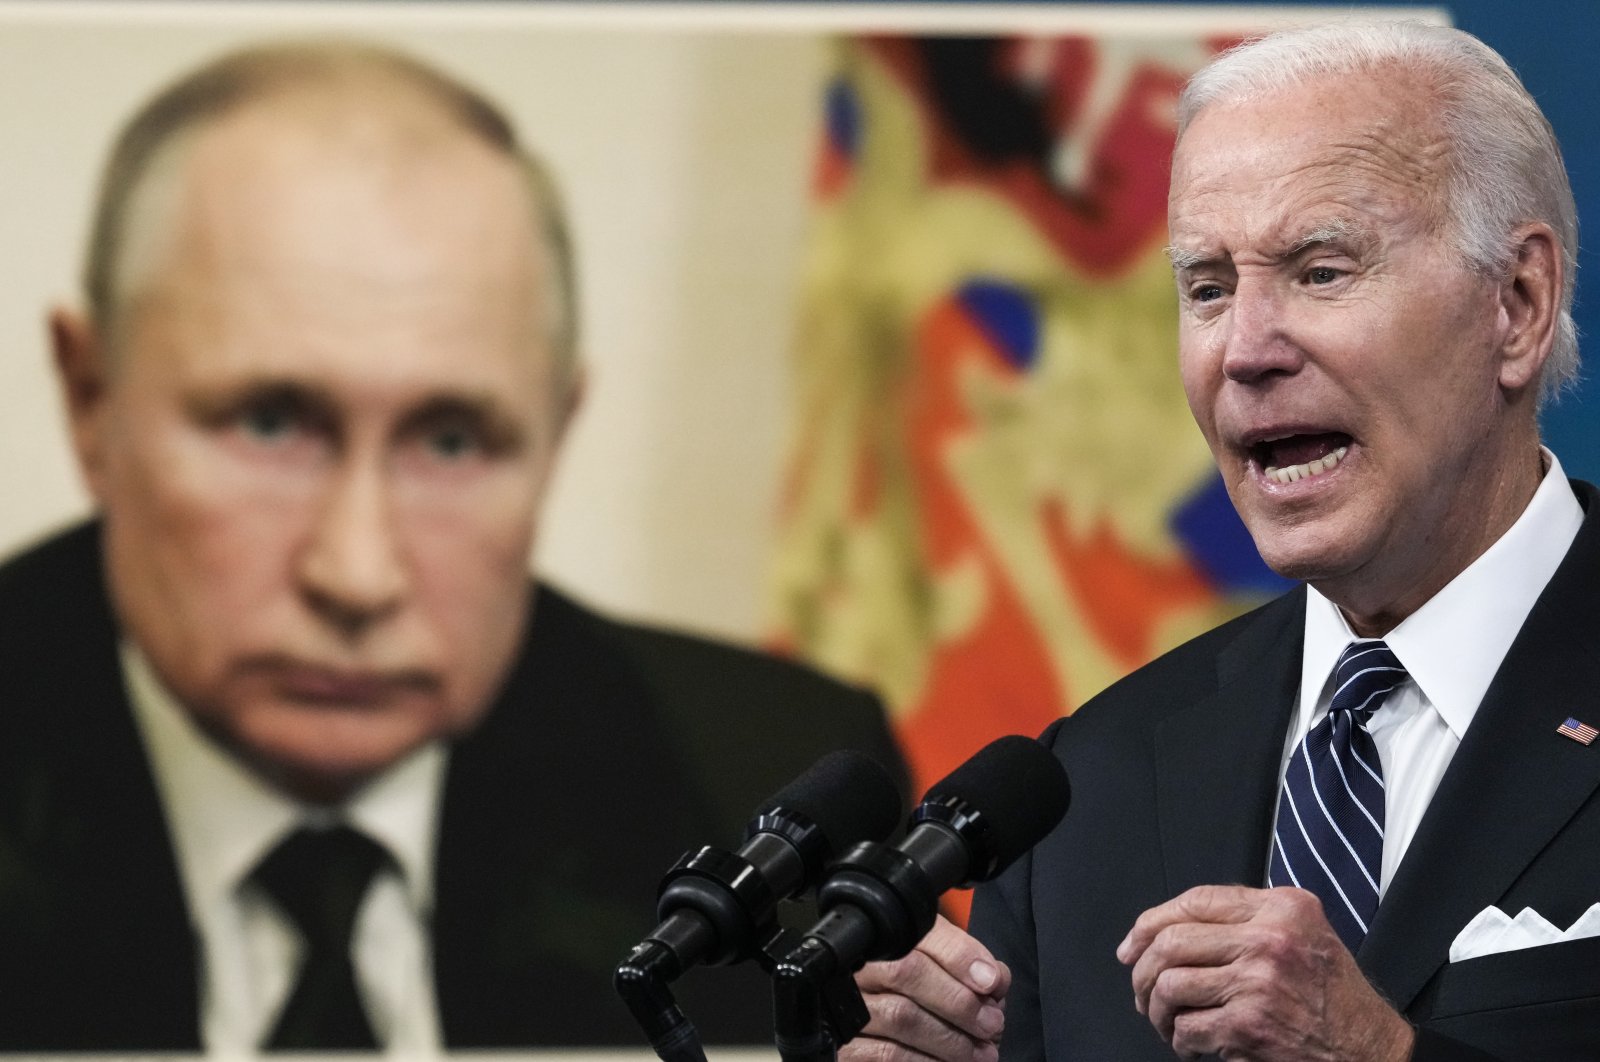 An image of Russian President Vladimir Putin (L) is displayed as U.S. President Joe Biden speaks about gas prices in the South Court Auditorium at the White House in Washington, D.C., U.S., June 22, 2022. (Getty Images Photo)